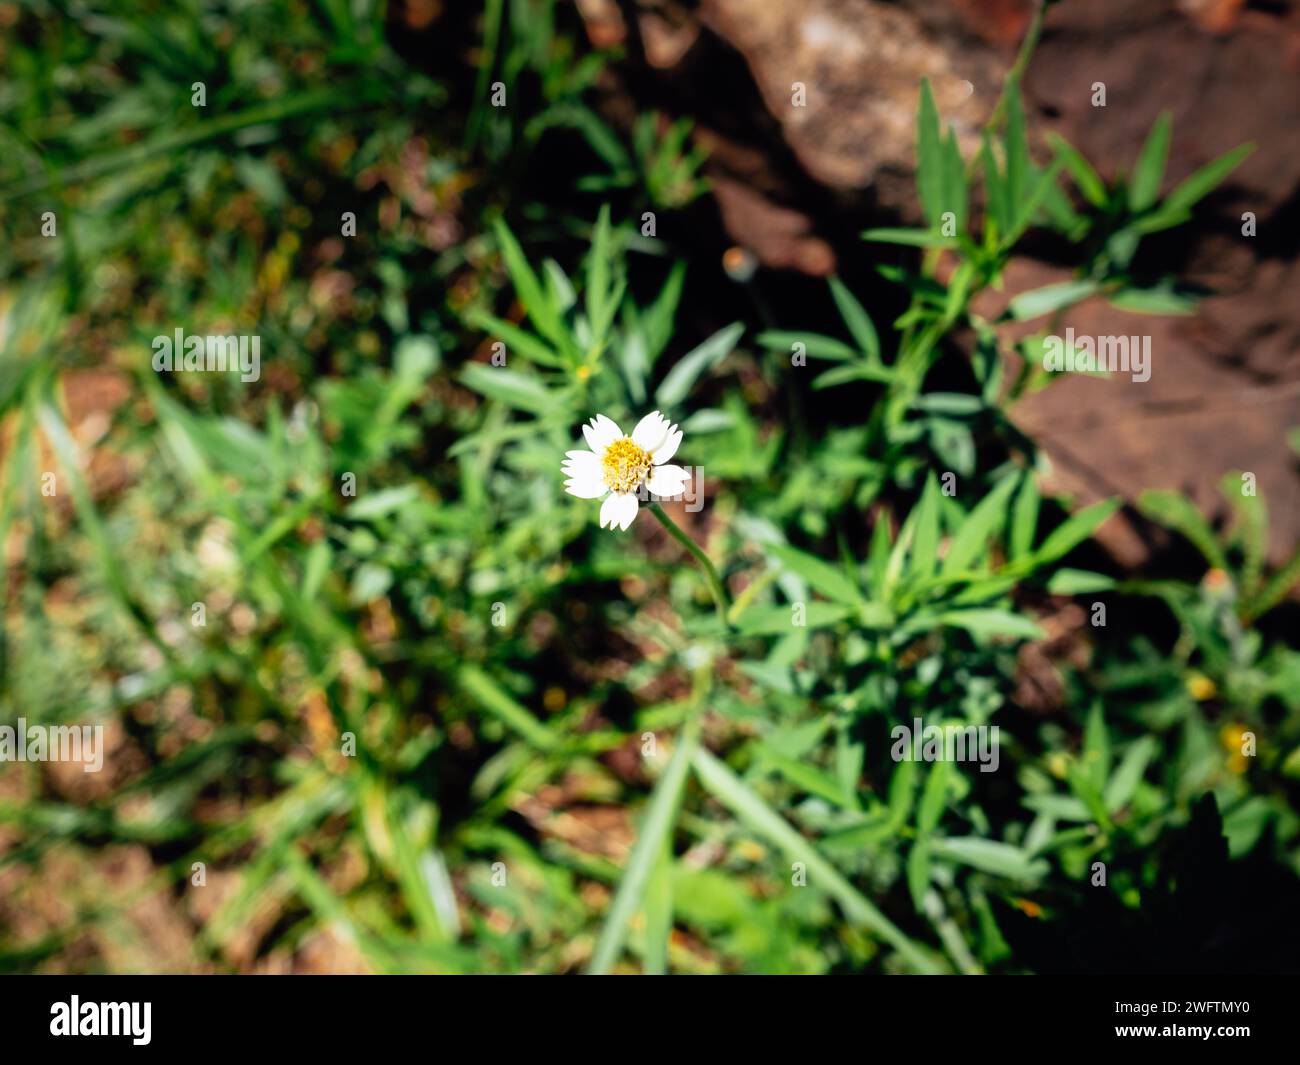 Closeup Tridax procumbens, commonly known as coatbuttons or tridax daisy, is a species of flowering plant in the daisy family. It is best known as a w Stock Photo